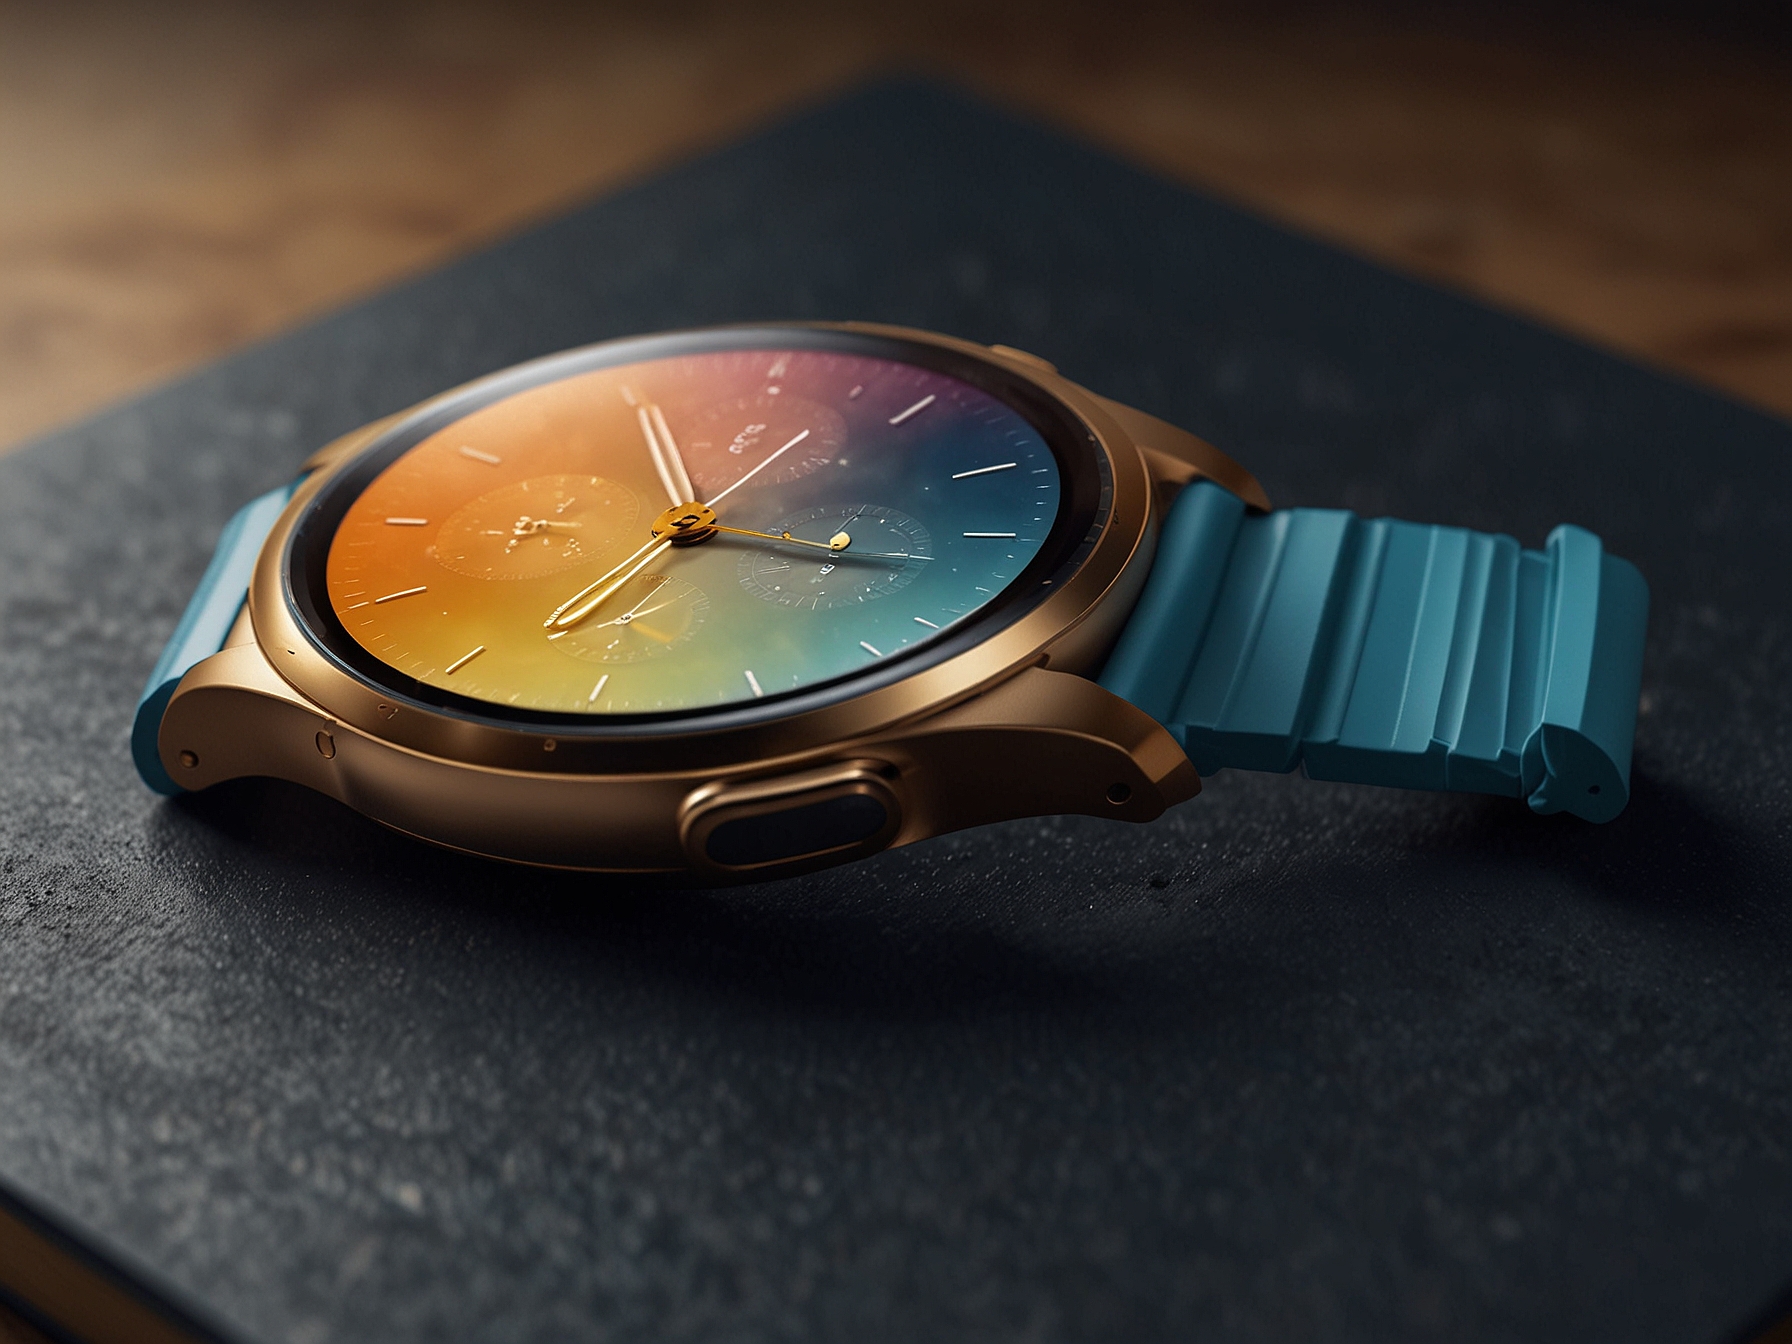 A rendered image showcases the Galaxy Watch 7 in its rumored new colors including Mystic Bronze, Cloud Blue, and Solar Yellow, placed beside a laptop and smartphone, indicating its stylish and versatile appeal.